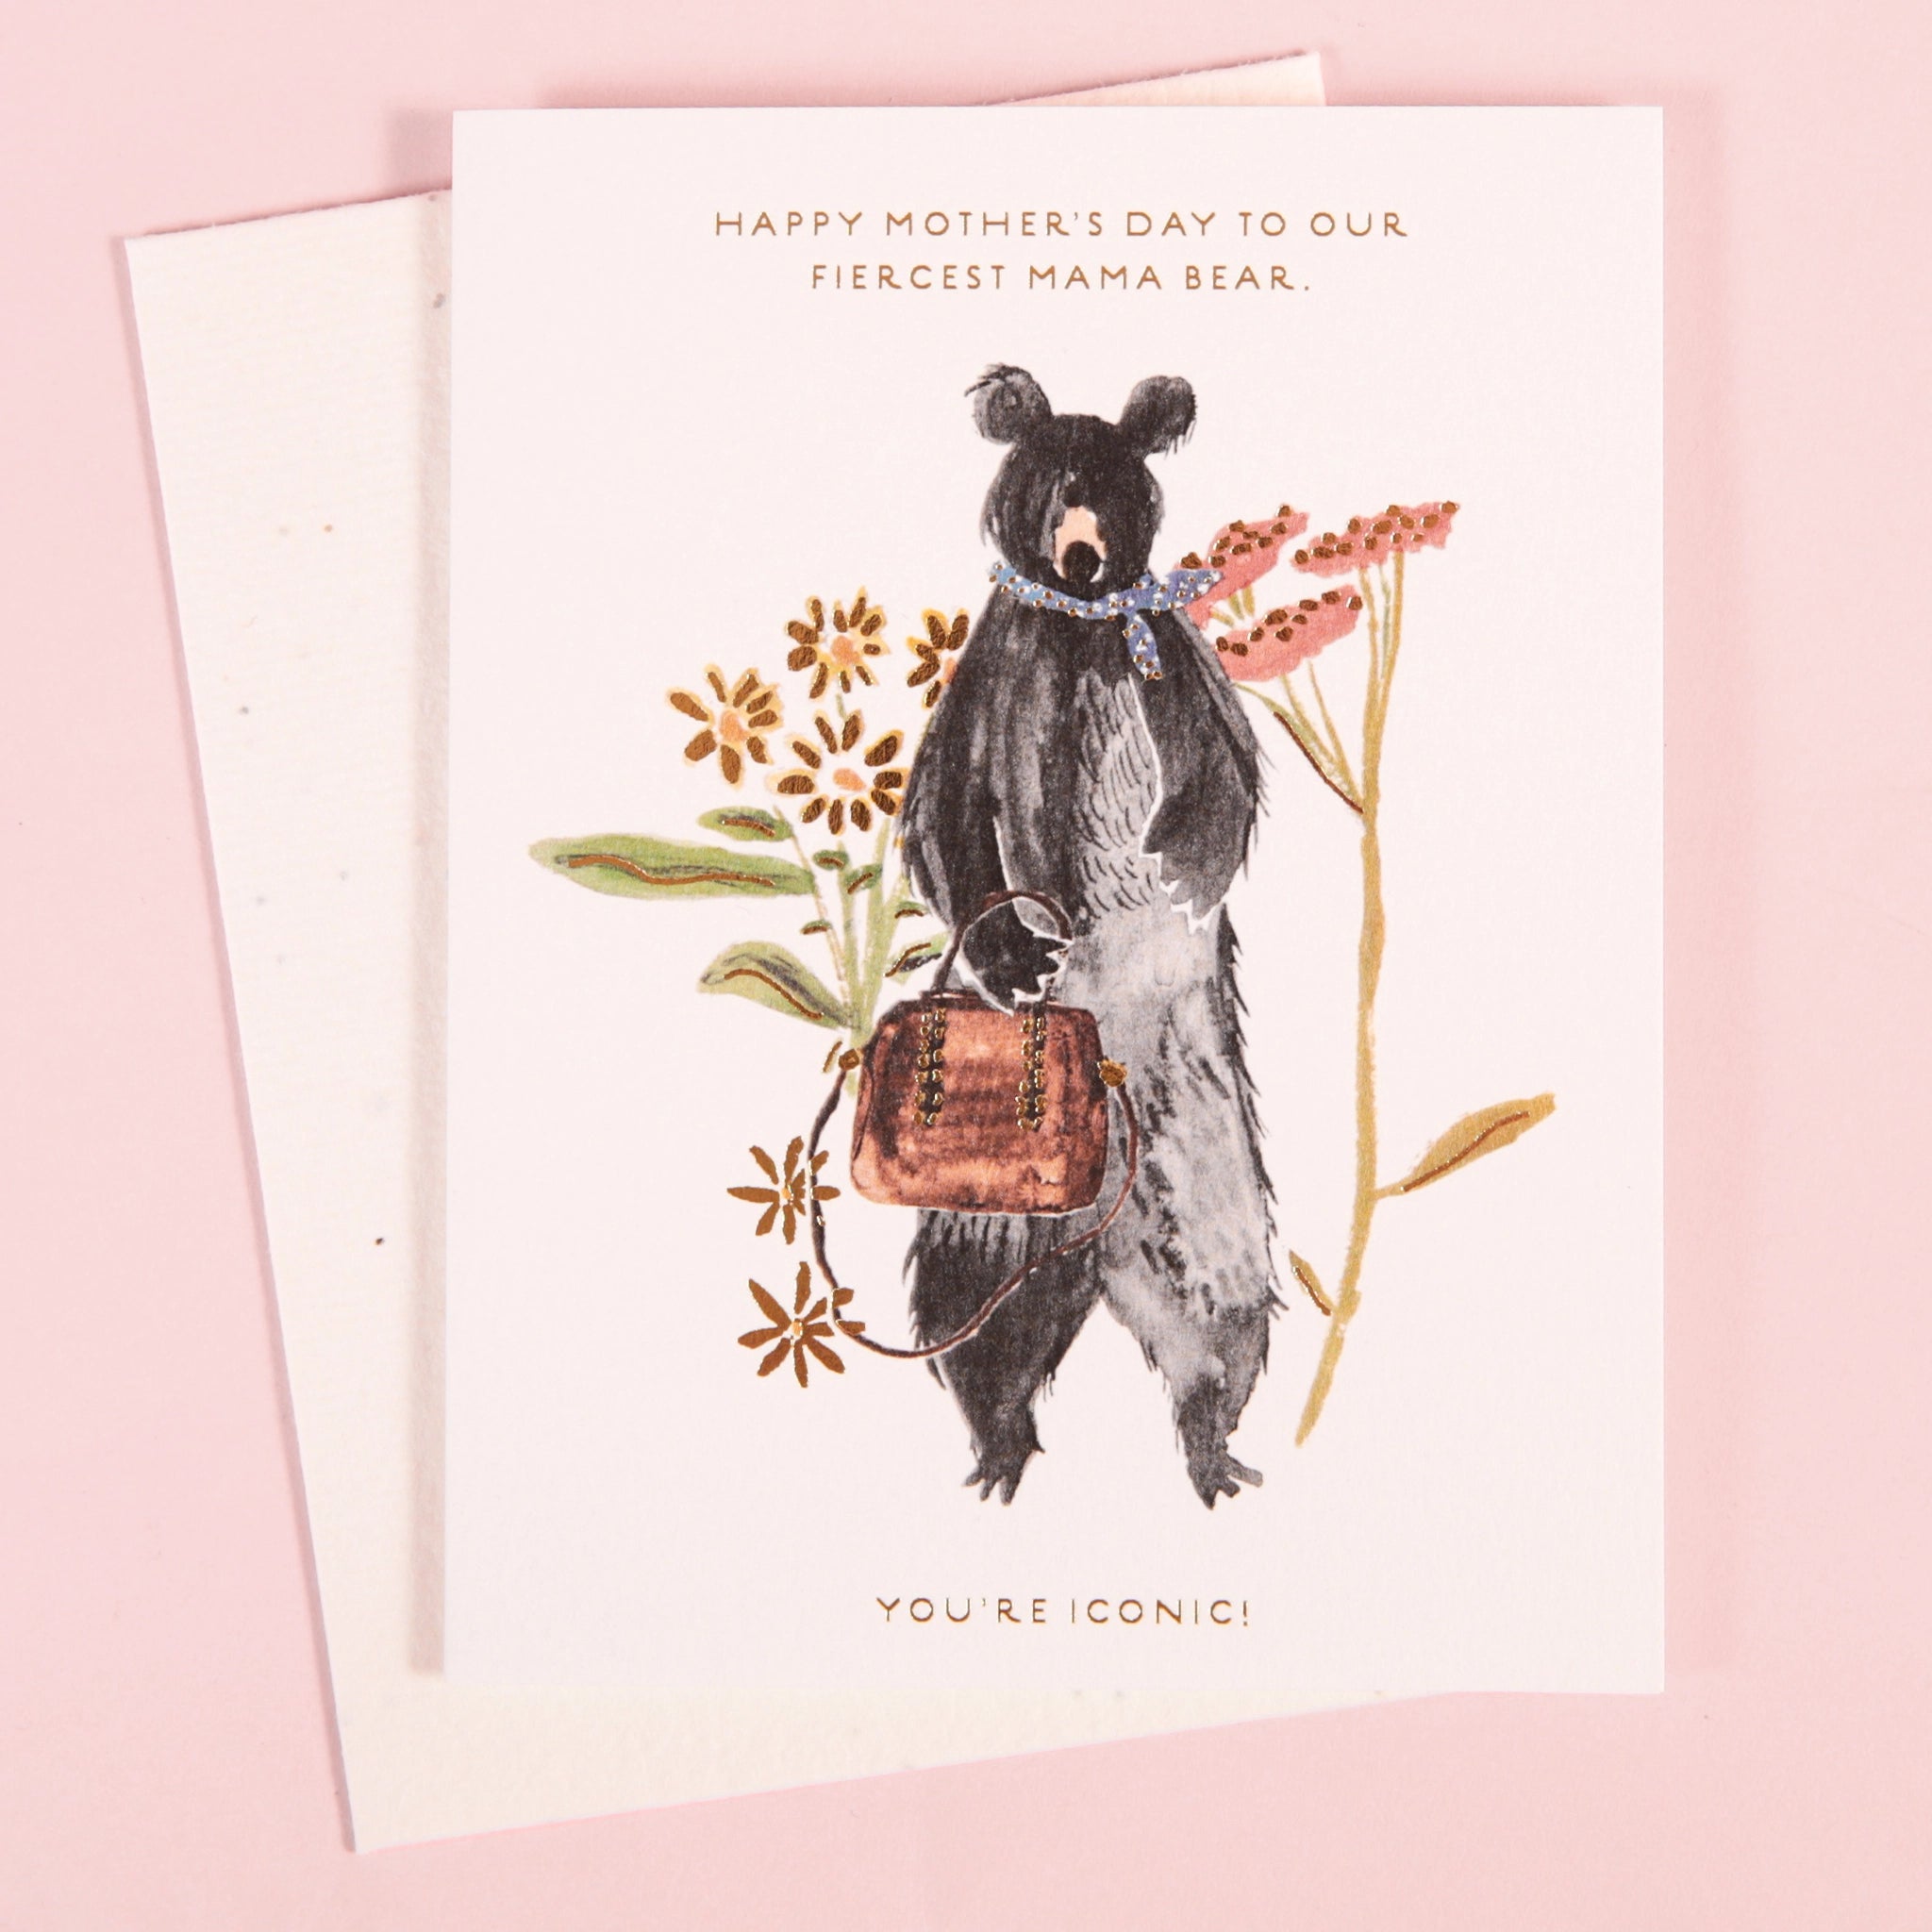 On a light pink background is a white card and envelope with an illustration of a black bear standing up on its hind legs while holding a brown purse in front of various flowers and text on the top that reads, "Happy Mother's Day to our fiercest mama bear".